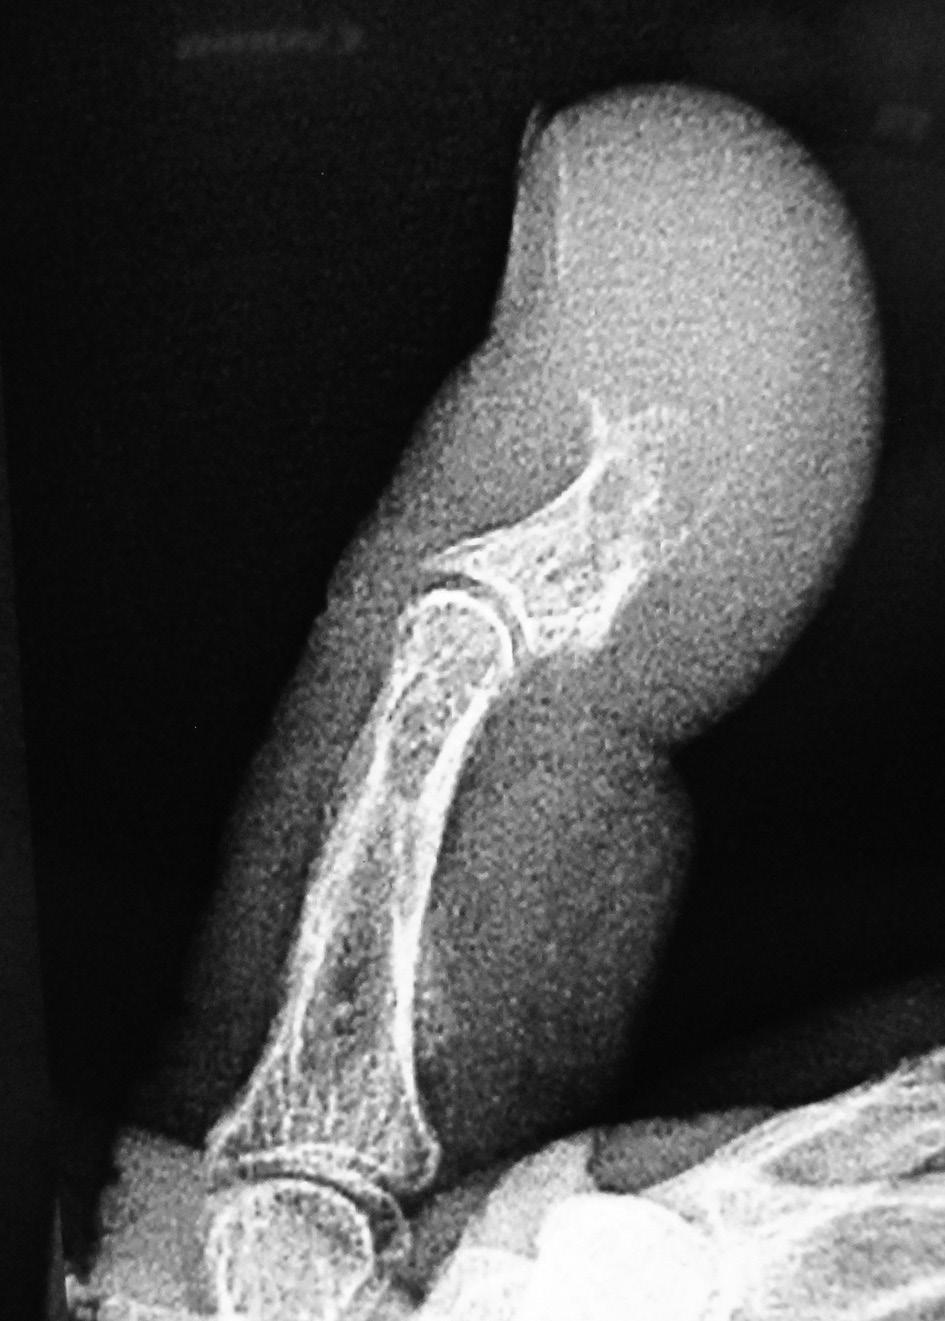 Anteroposterior Radiographic View of the Distal Phalanx of the Thumb Showing